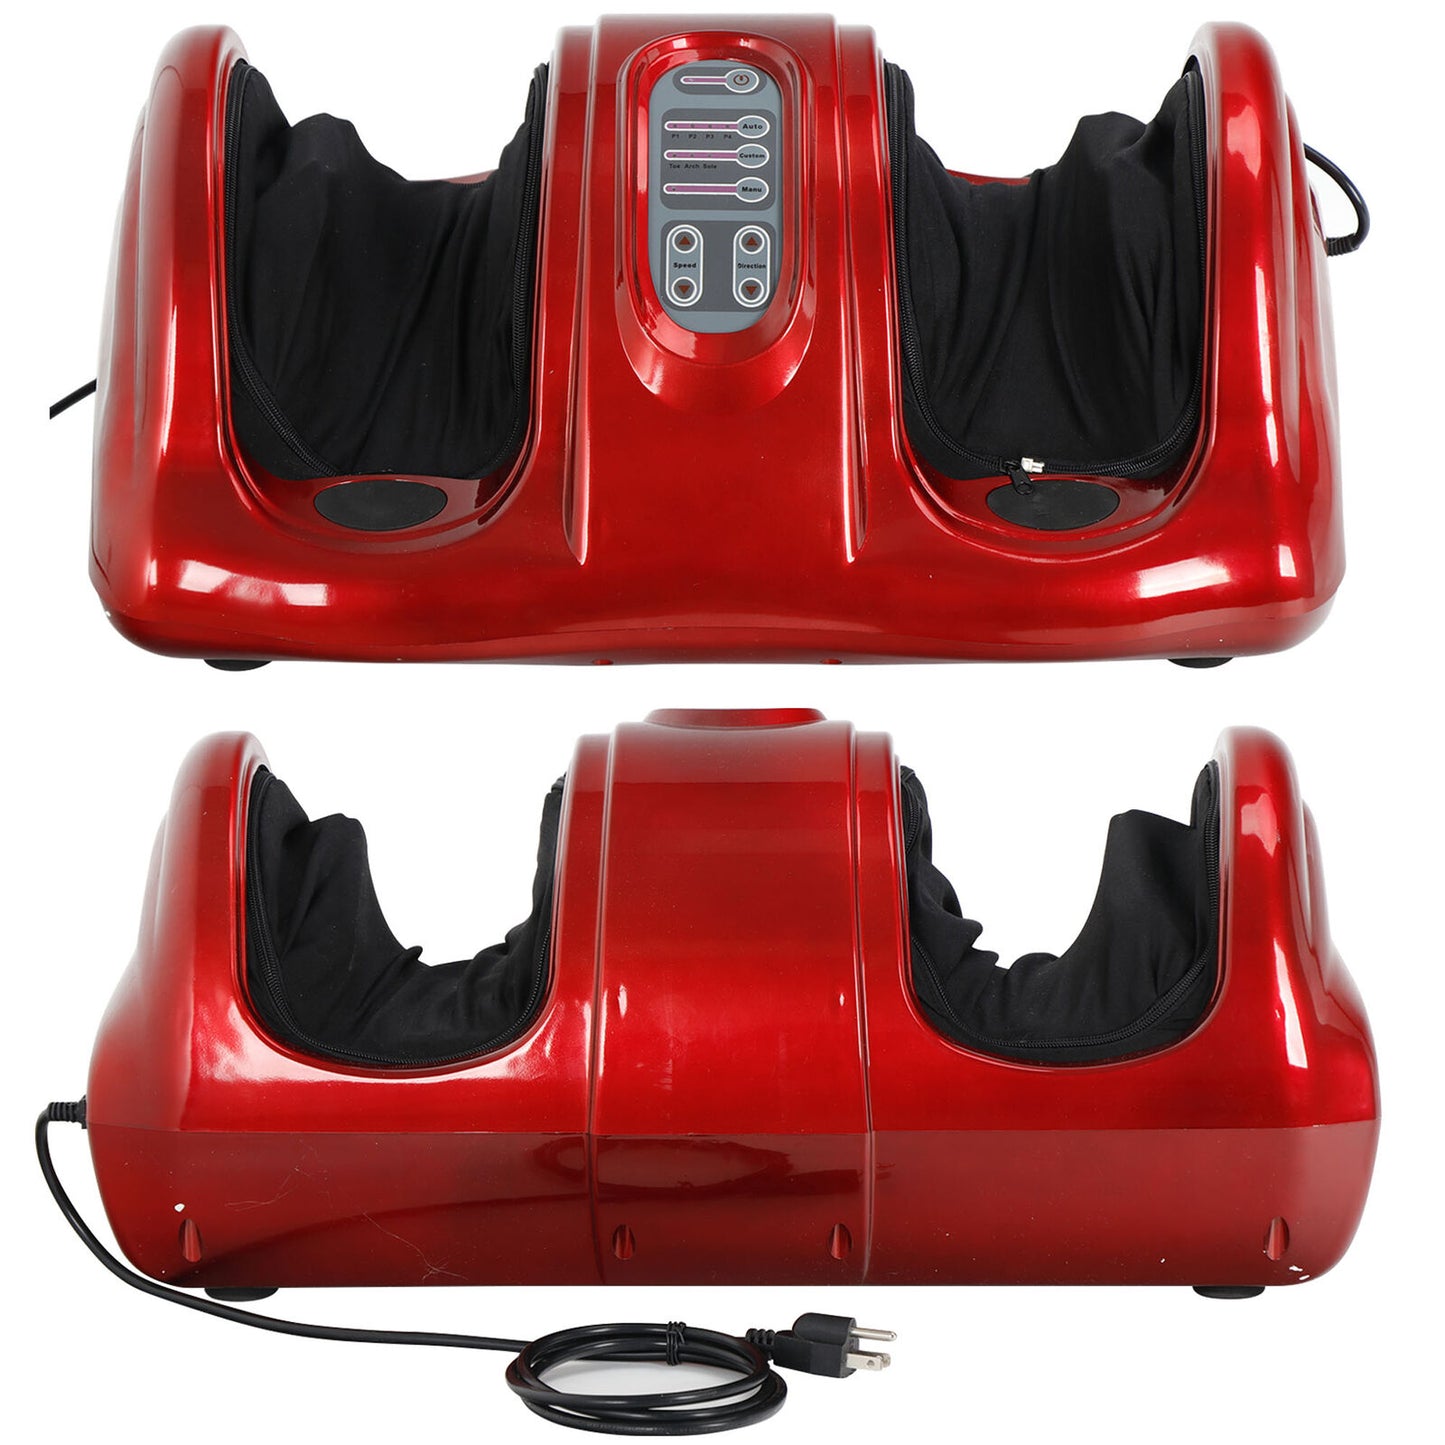 Foot Massager Machine Shiatsu Home Red With Switchable Massage Kneading Rolling